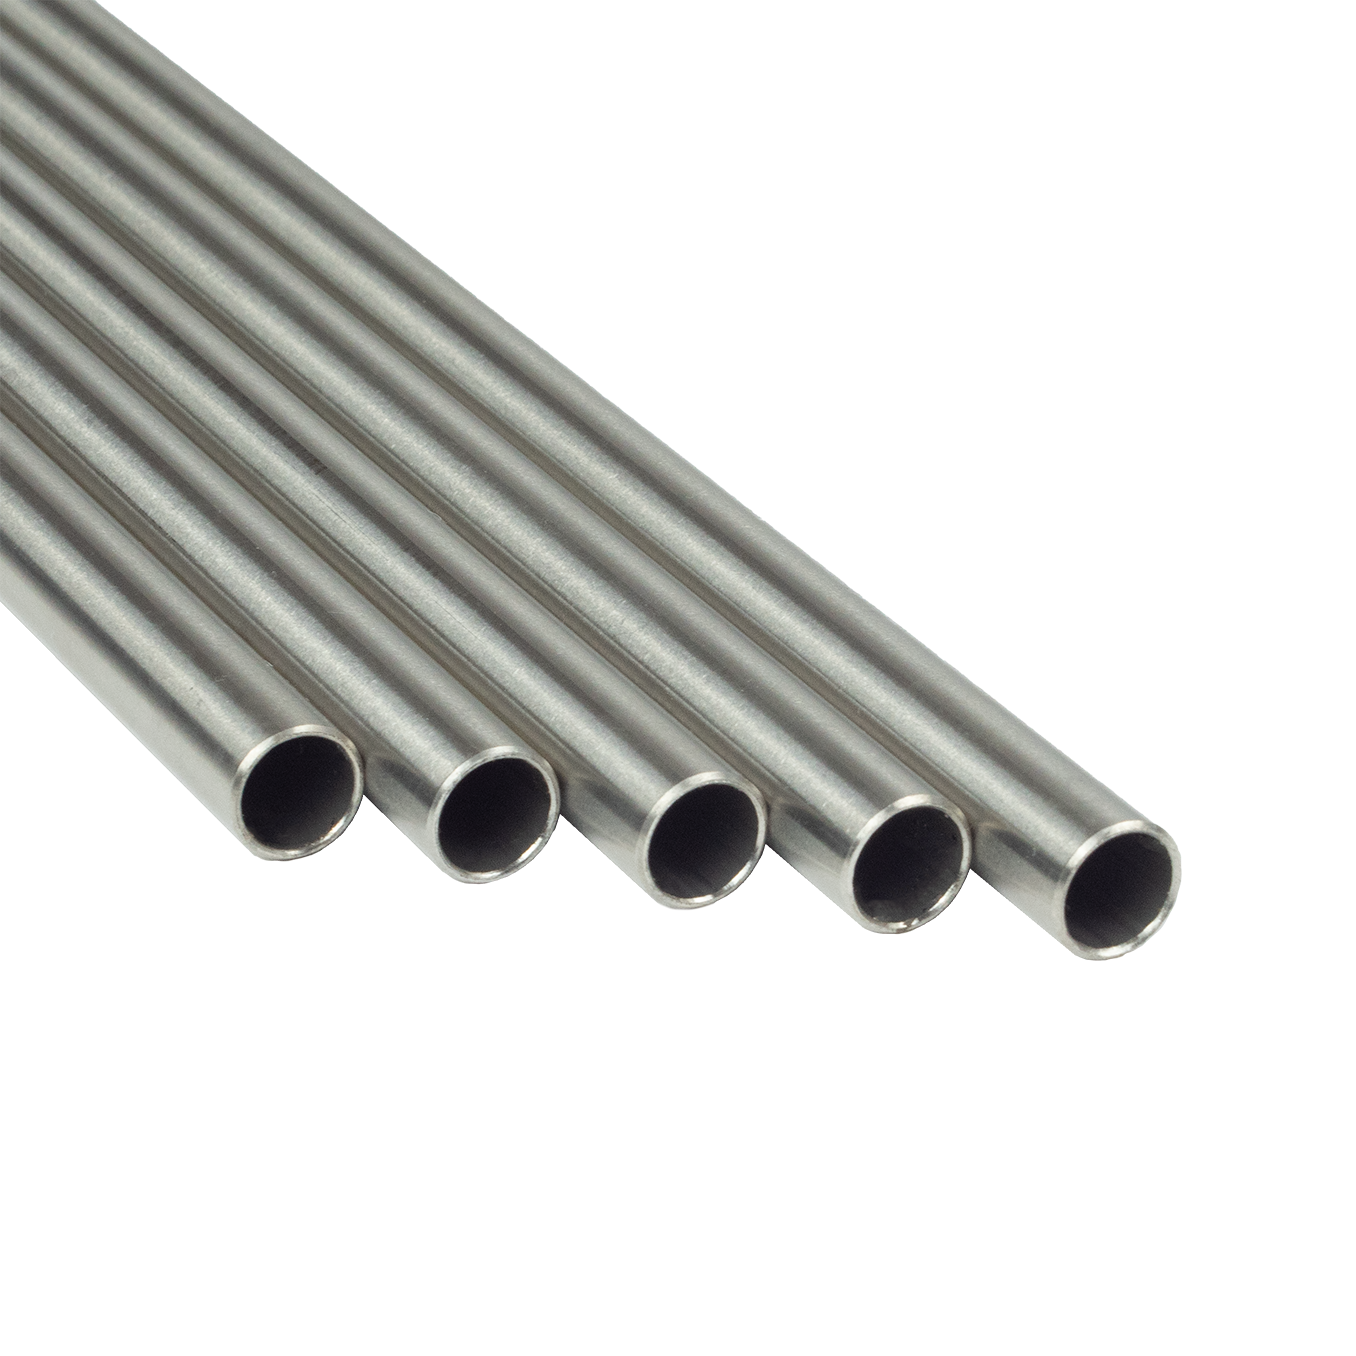 SFS Stand Tube - Ø 13 x 1 mm, length 150 mm - stainless steel